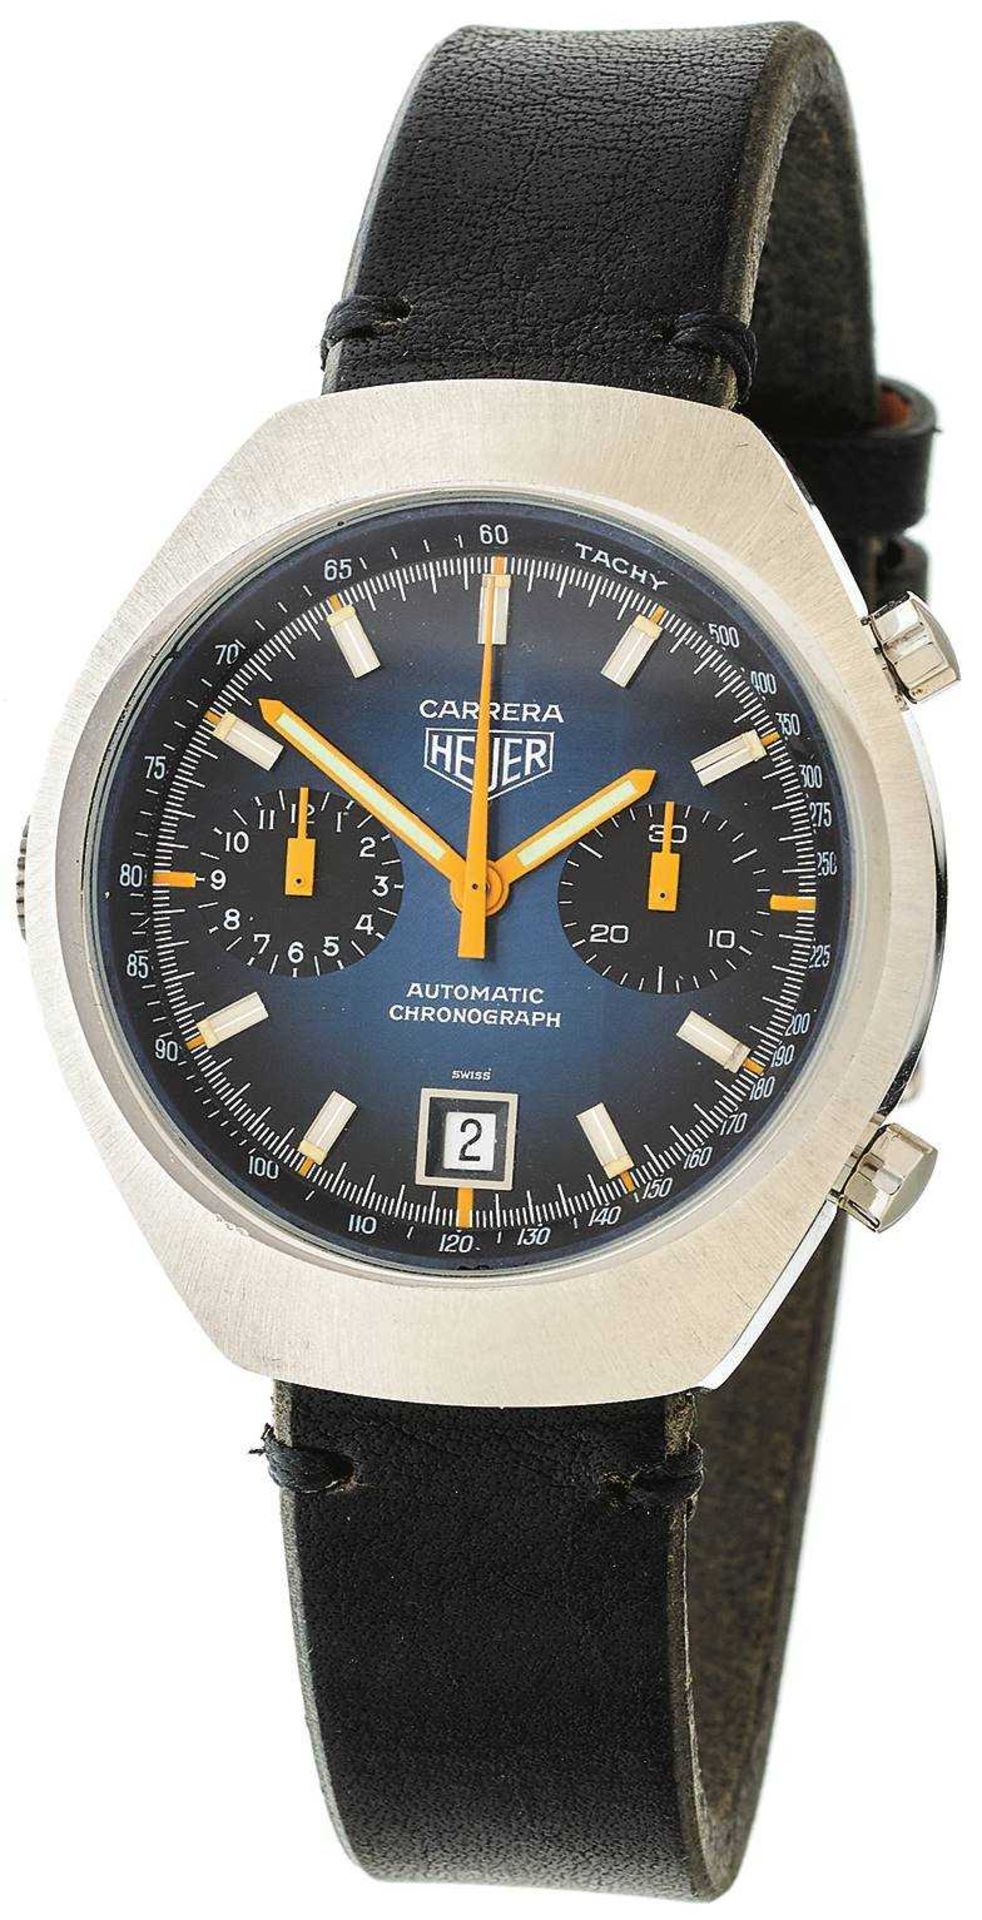 Gentlemen bracelet clock \\\Carrera this year\\\ chronograph. Ca. 38 mm, about 1975, stainless steel